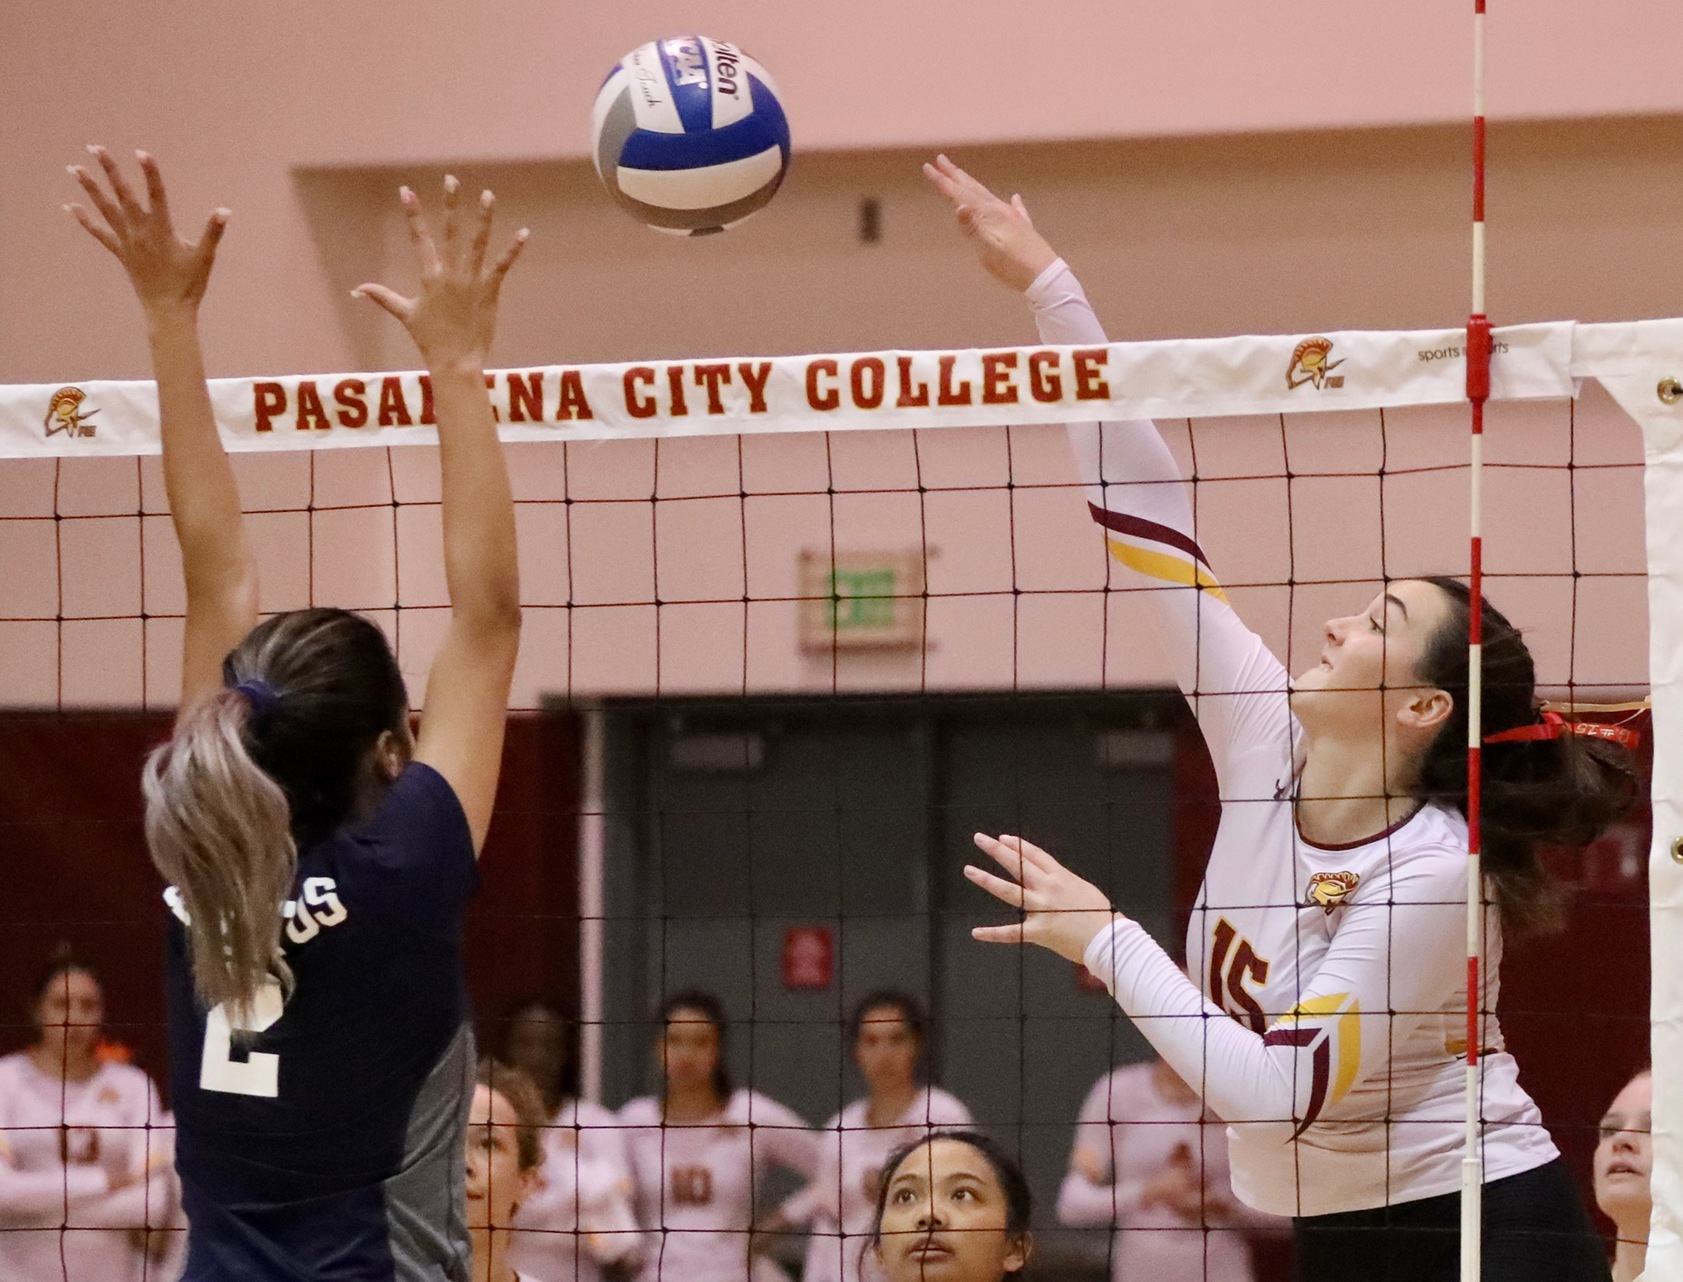 Janell Currier drives an attack during PCC's home sweep over Cerritos Wednesday night, photo by Michael Watkins.